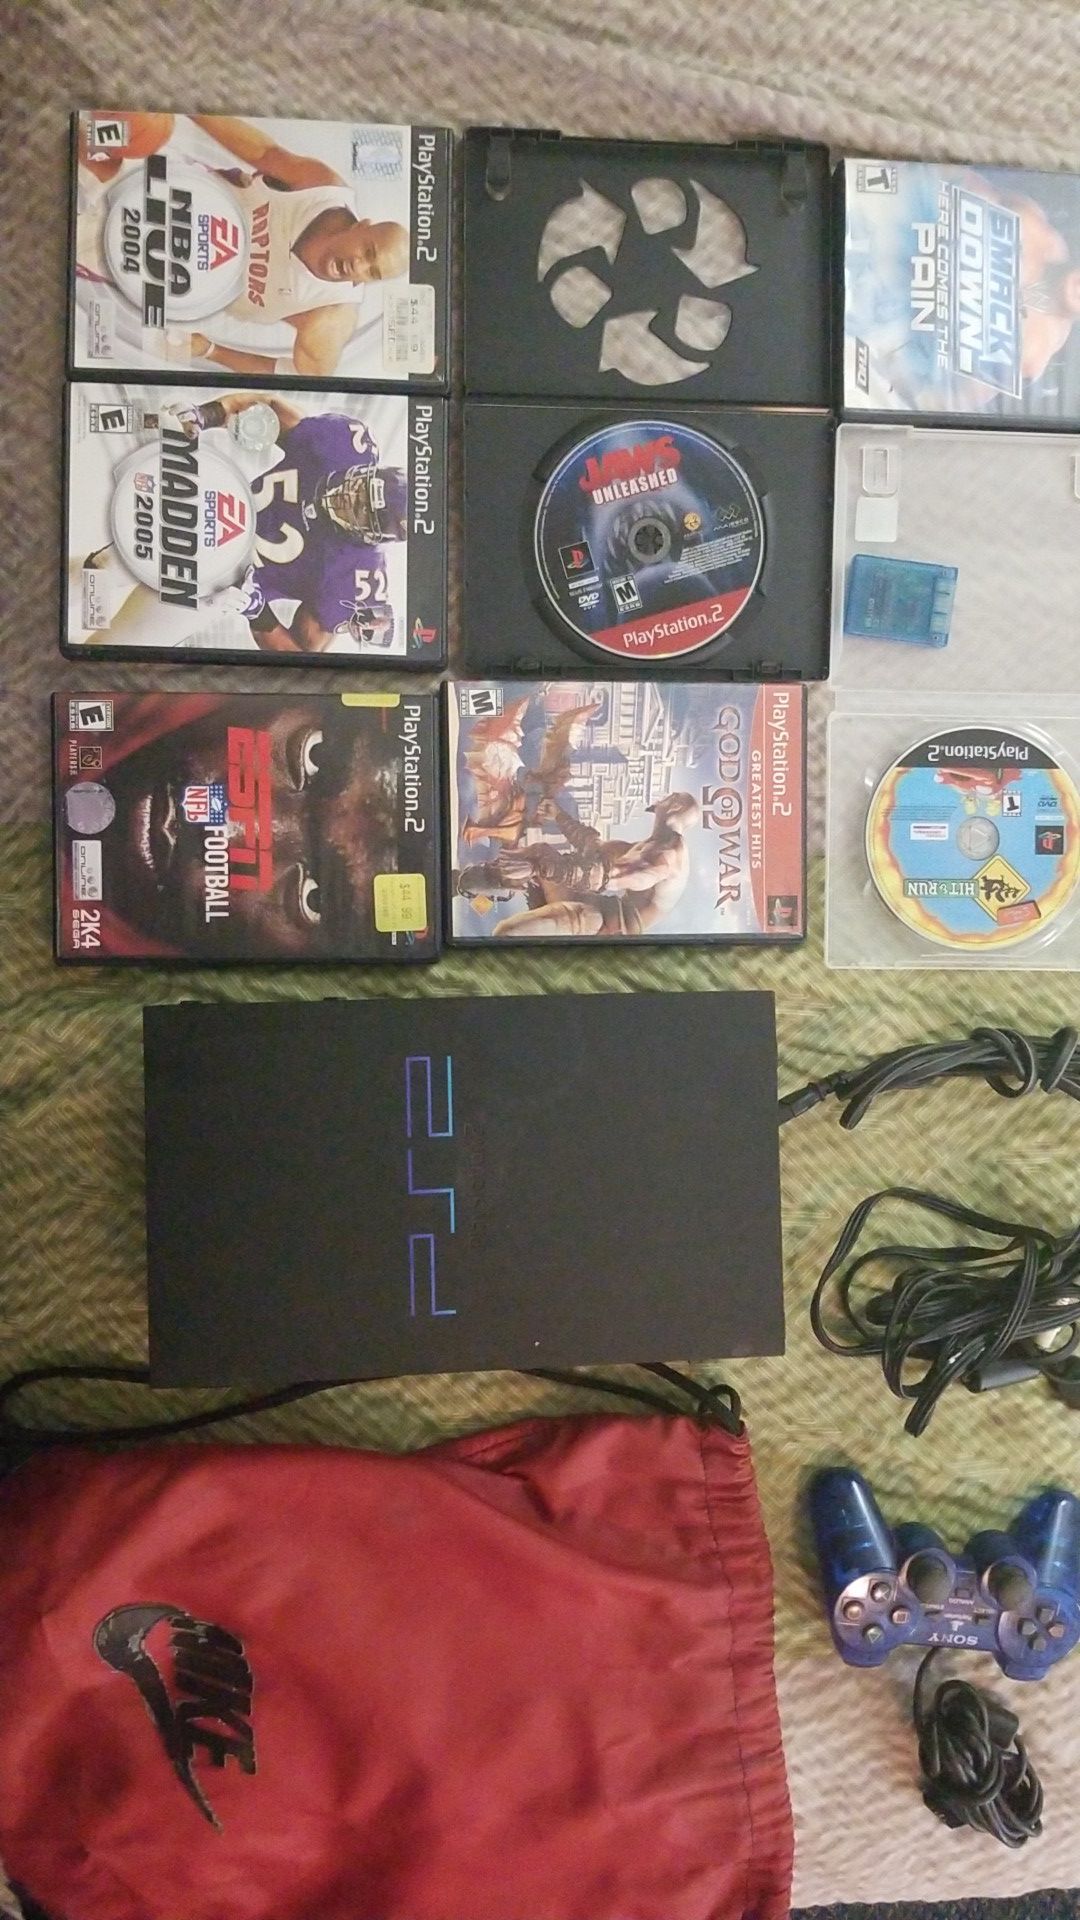 Sony playstation 2 with 7 games